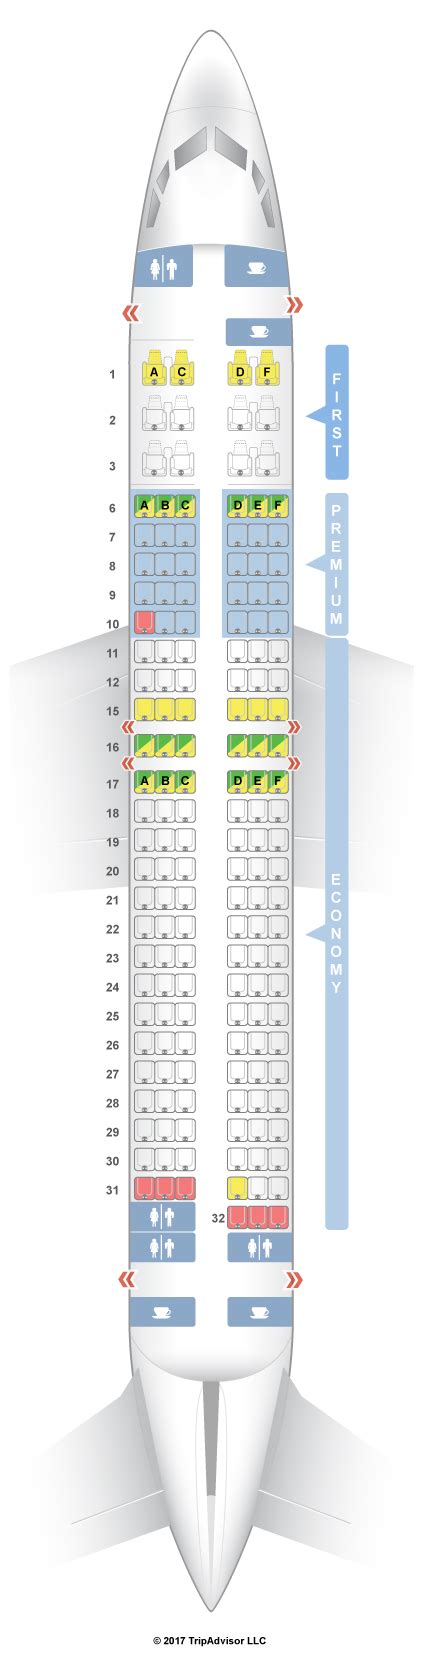 Alaska Airlines Aircraft Seatmaps Airline Seating Maps And Layouts